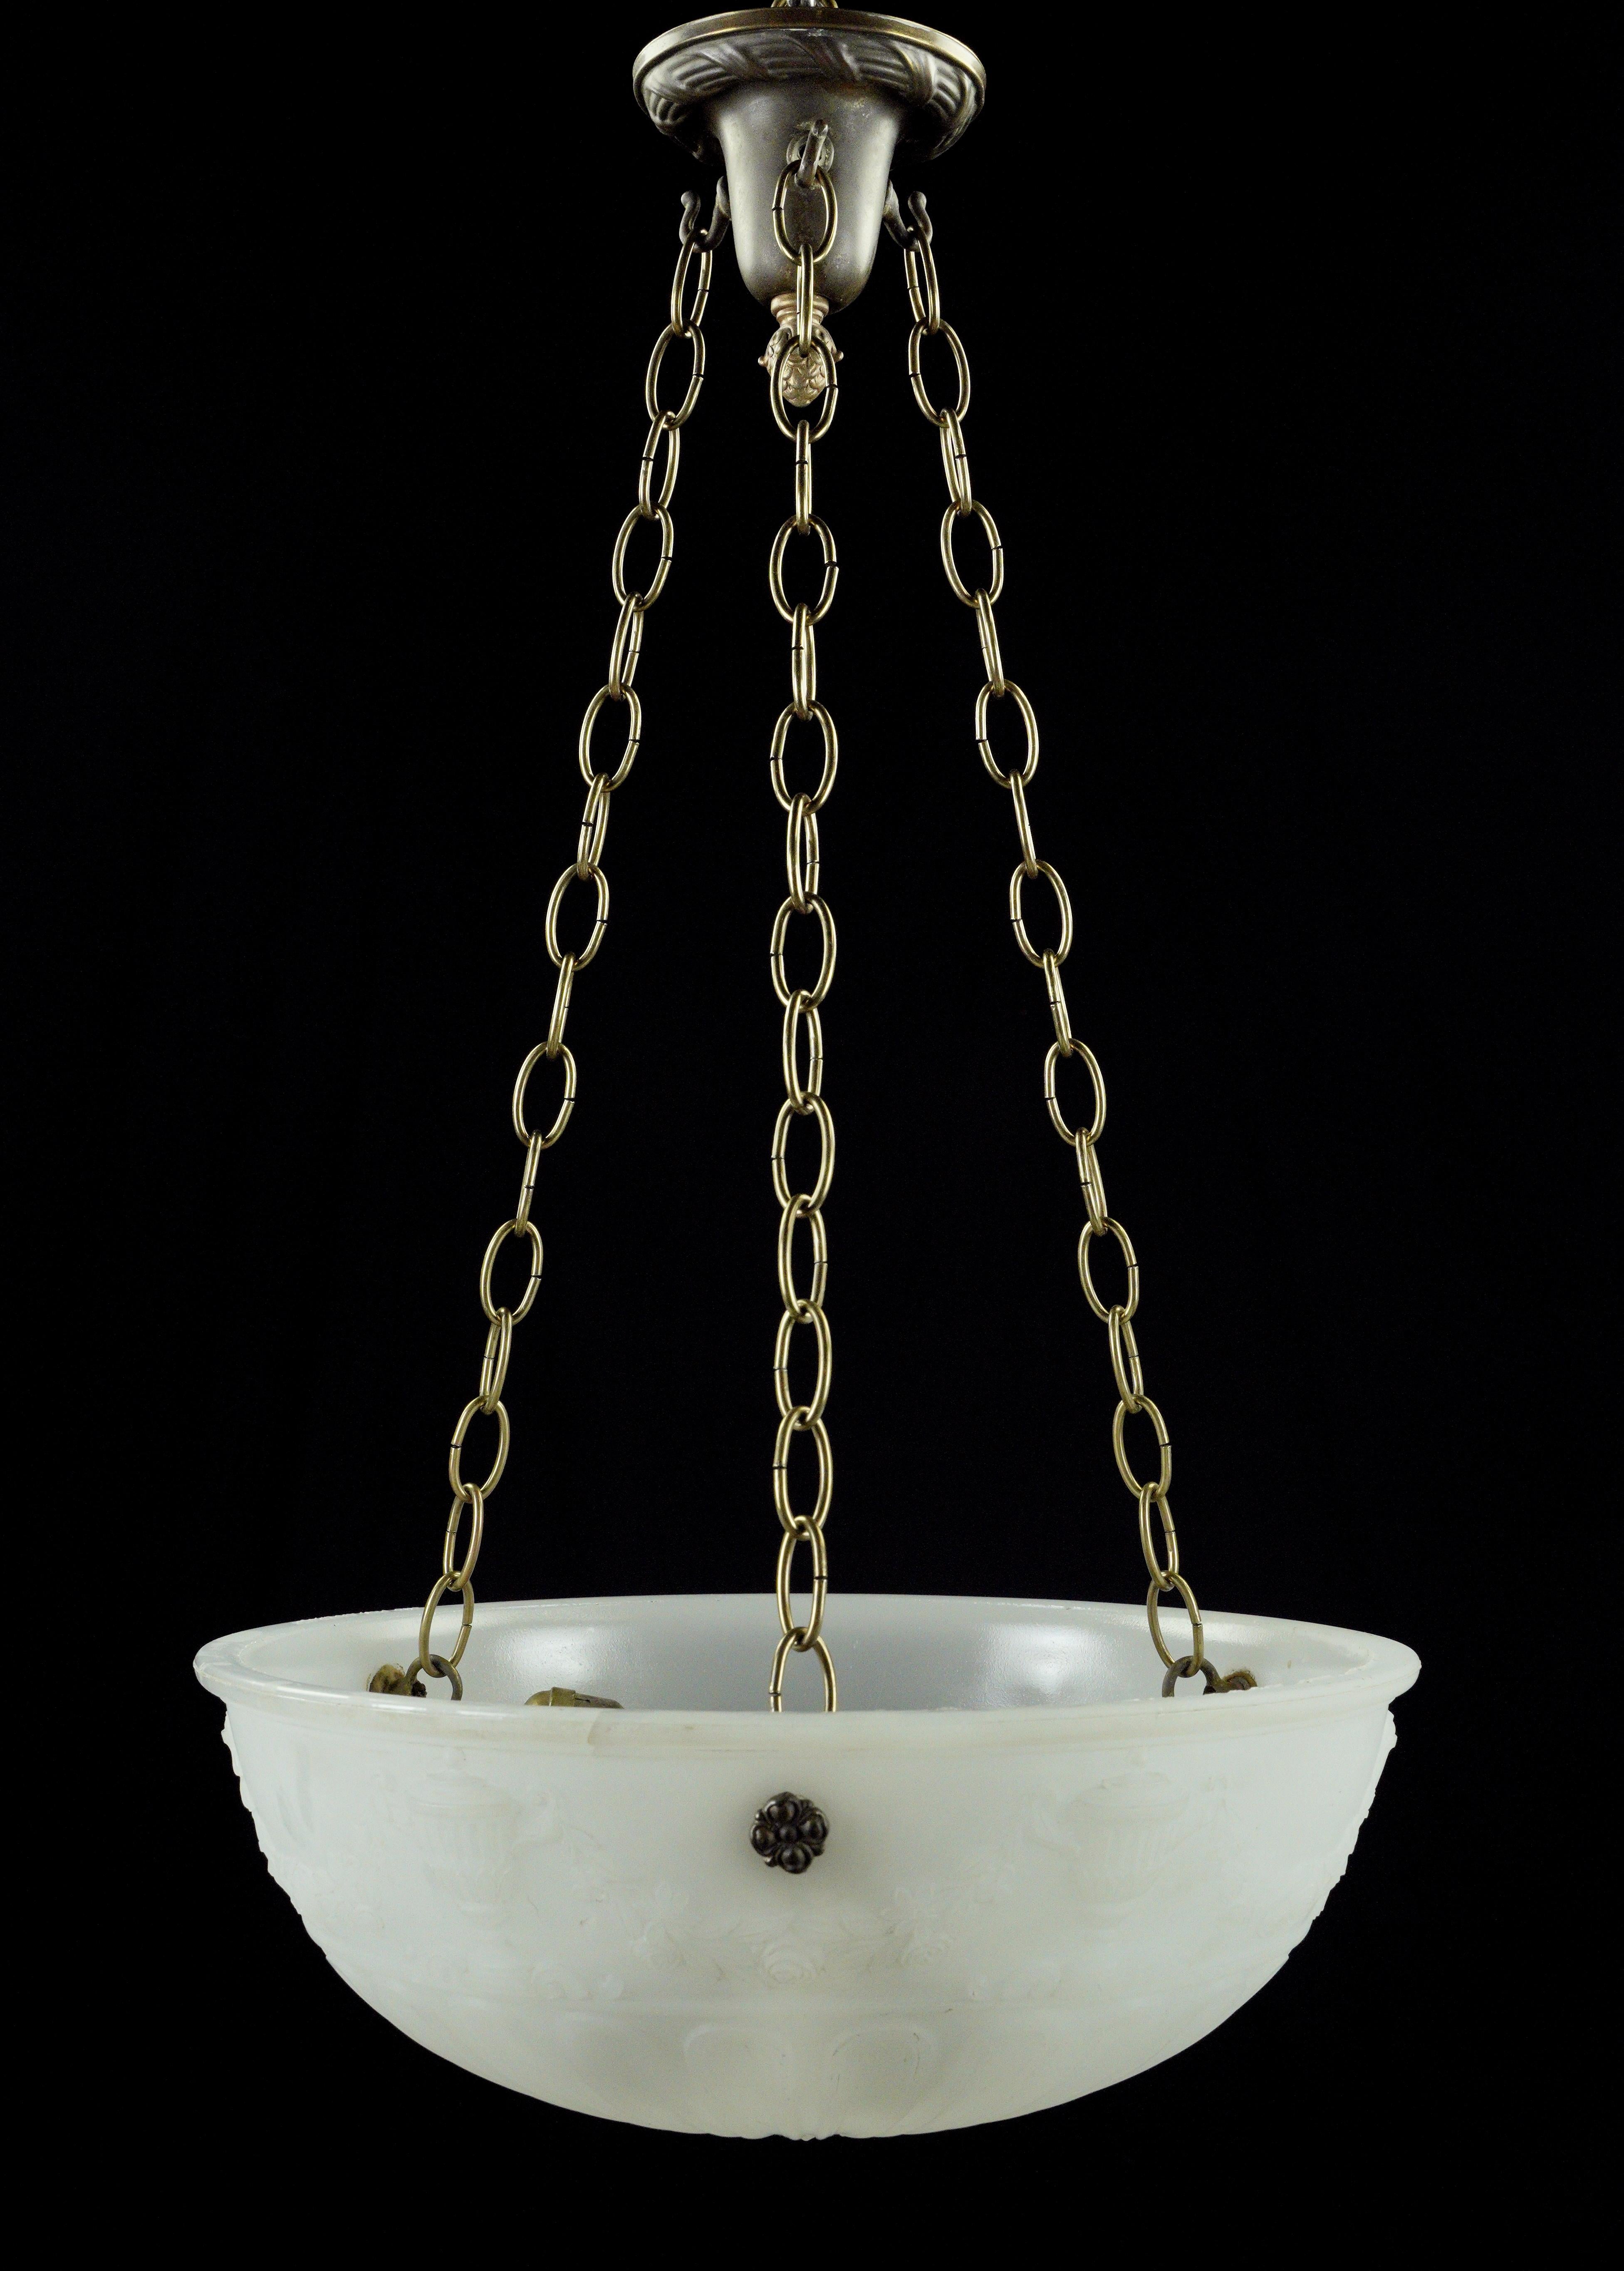 White cast glass Victorian bowl pendant light with ornate floral, foliate and urn designs with a steel chain. This requires three standard medium base bulbs. Stamped 6116 on the bowl rim. Good condition with appropriate wear from age. Cleaned and